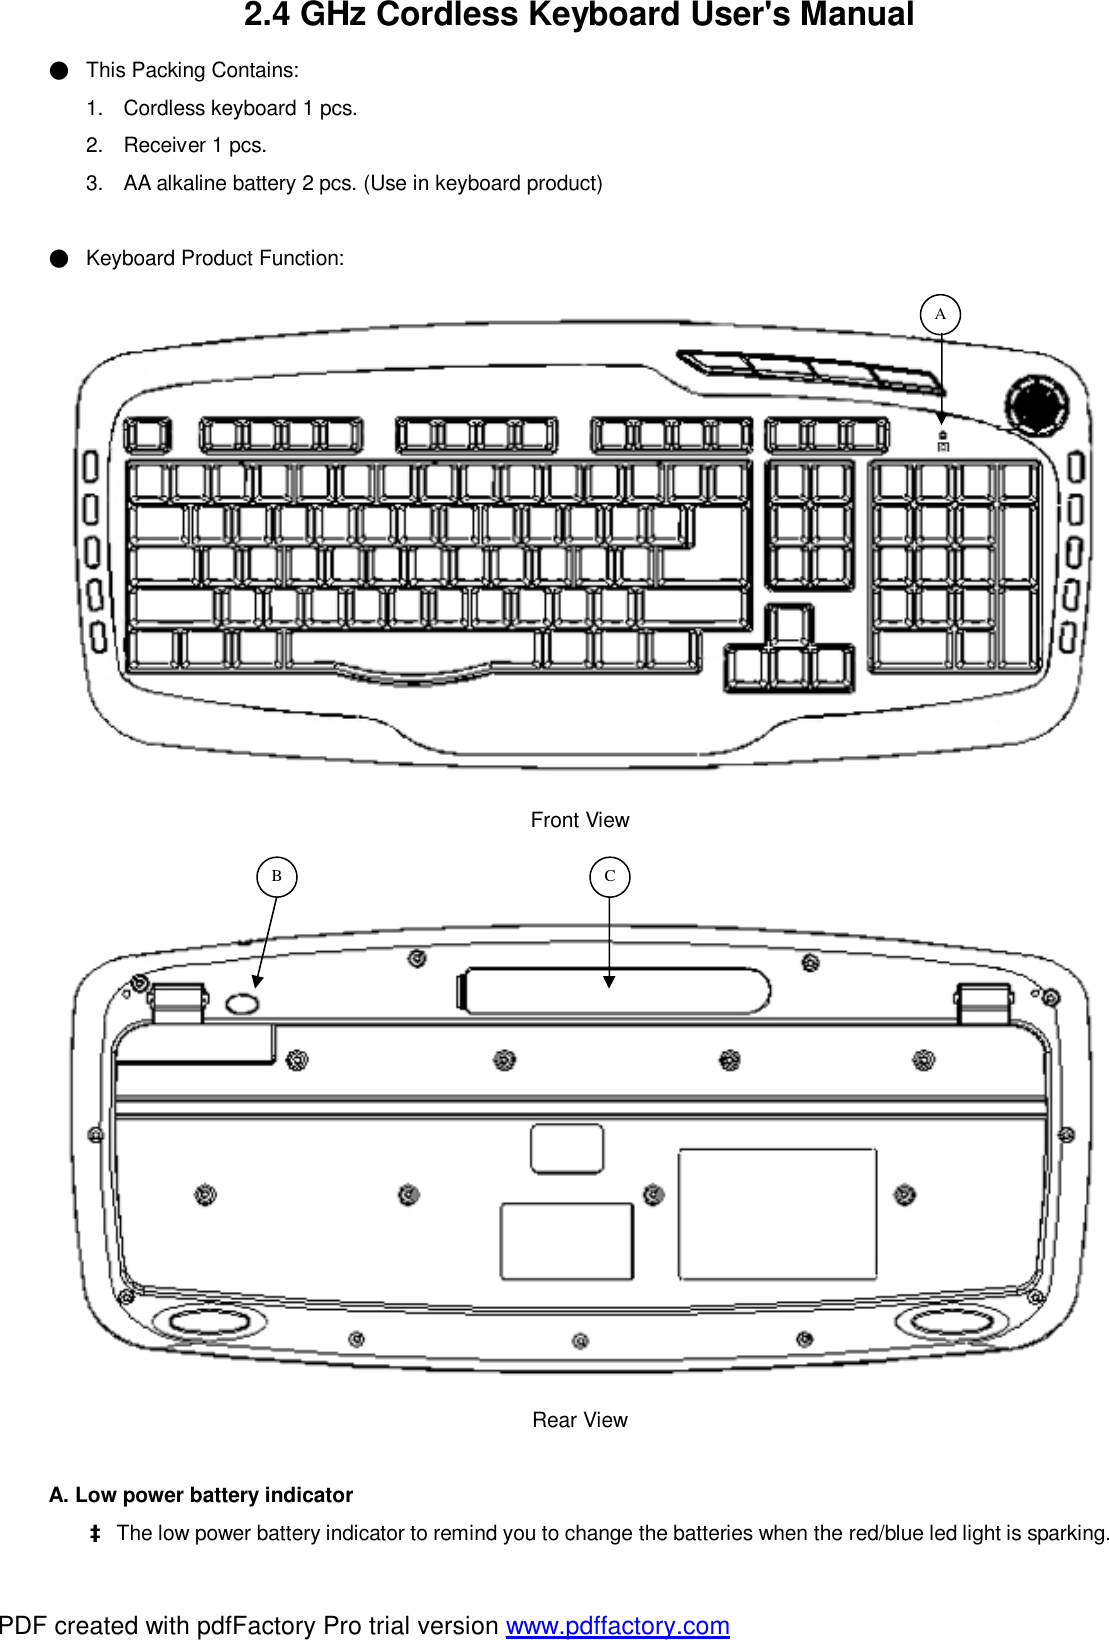 2.4 GHz Cordless Keyboard User&apos;s Manual ● This Packing Contains: 1. Cordless keyboard 1 pcs. 2. Receiver 1 pcs. 3. AA alkaline battery 2 pcs. (Use in keyboard product)  ● Keyboard Product Function:  Front View   Rear View  A. Low power battery indicator     à The low power battery indicator to remind you to change the batteries when the red/blue led light is sparking.  C B  A PDF created with pdfFactory Pro trial version www.pdffactory.com